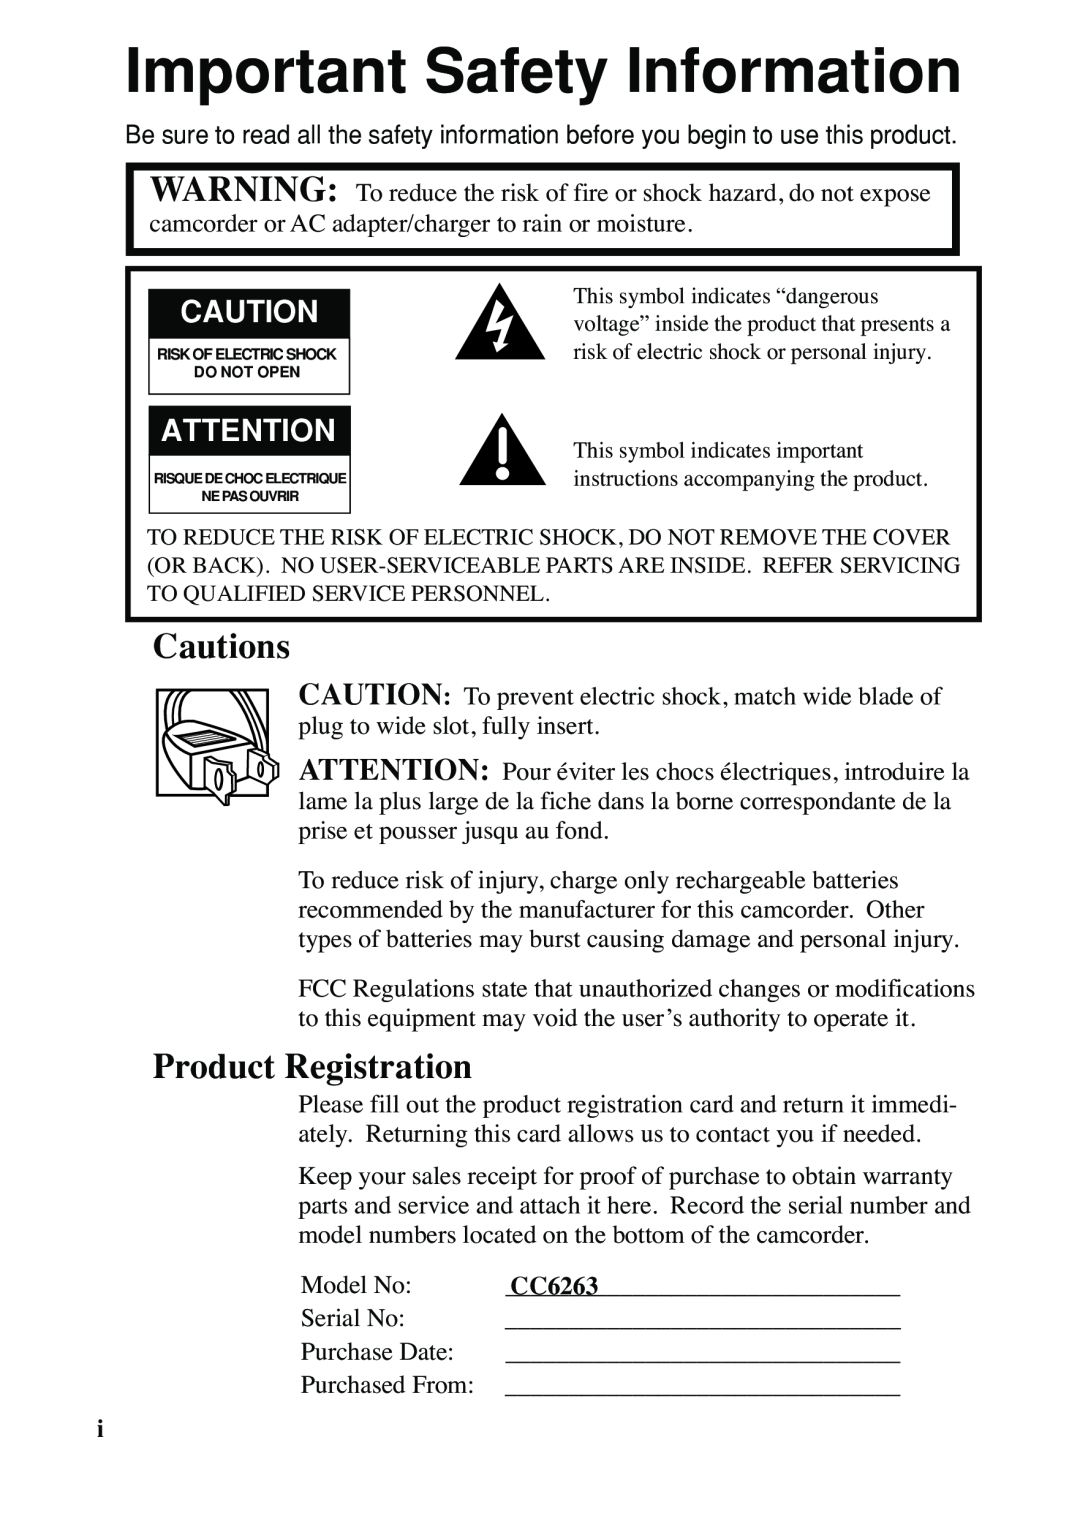 RCA CC6263 manual Cautions, Product Registration, Important Safety Information 